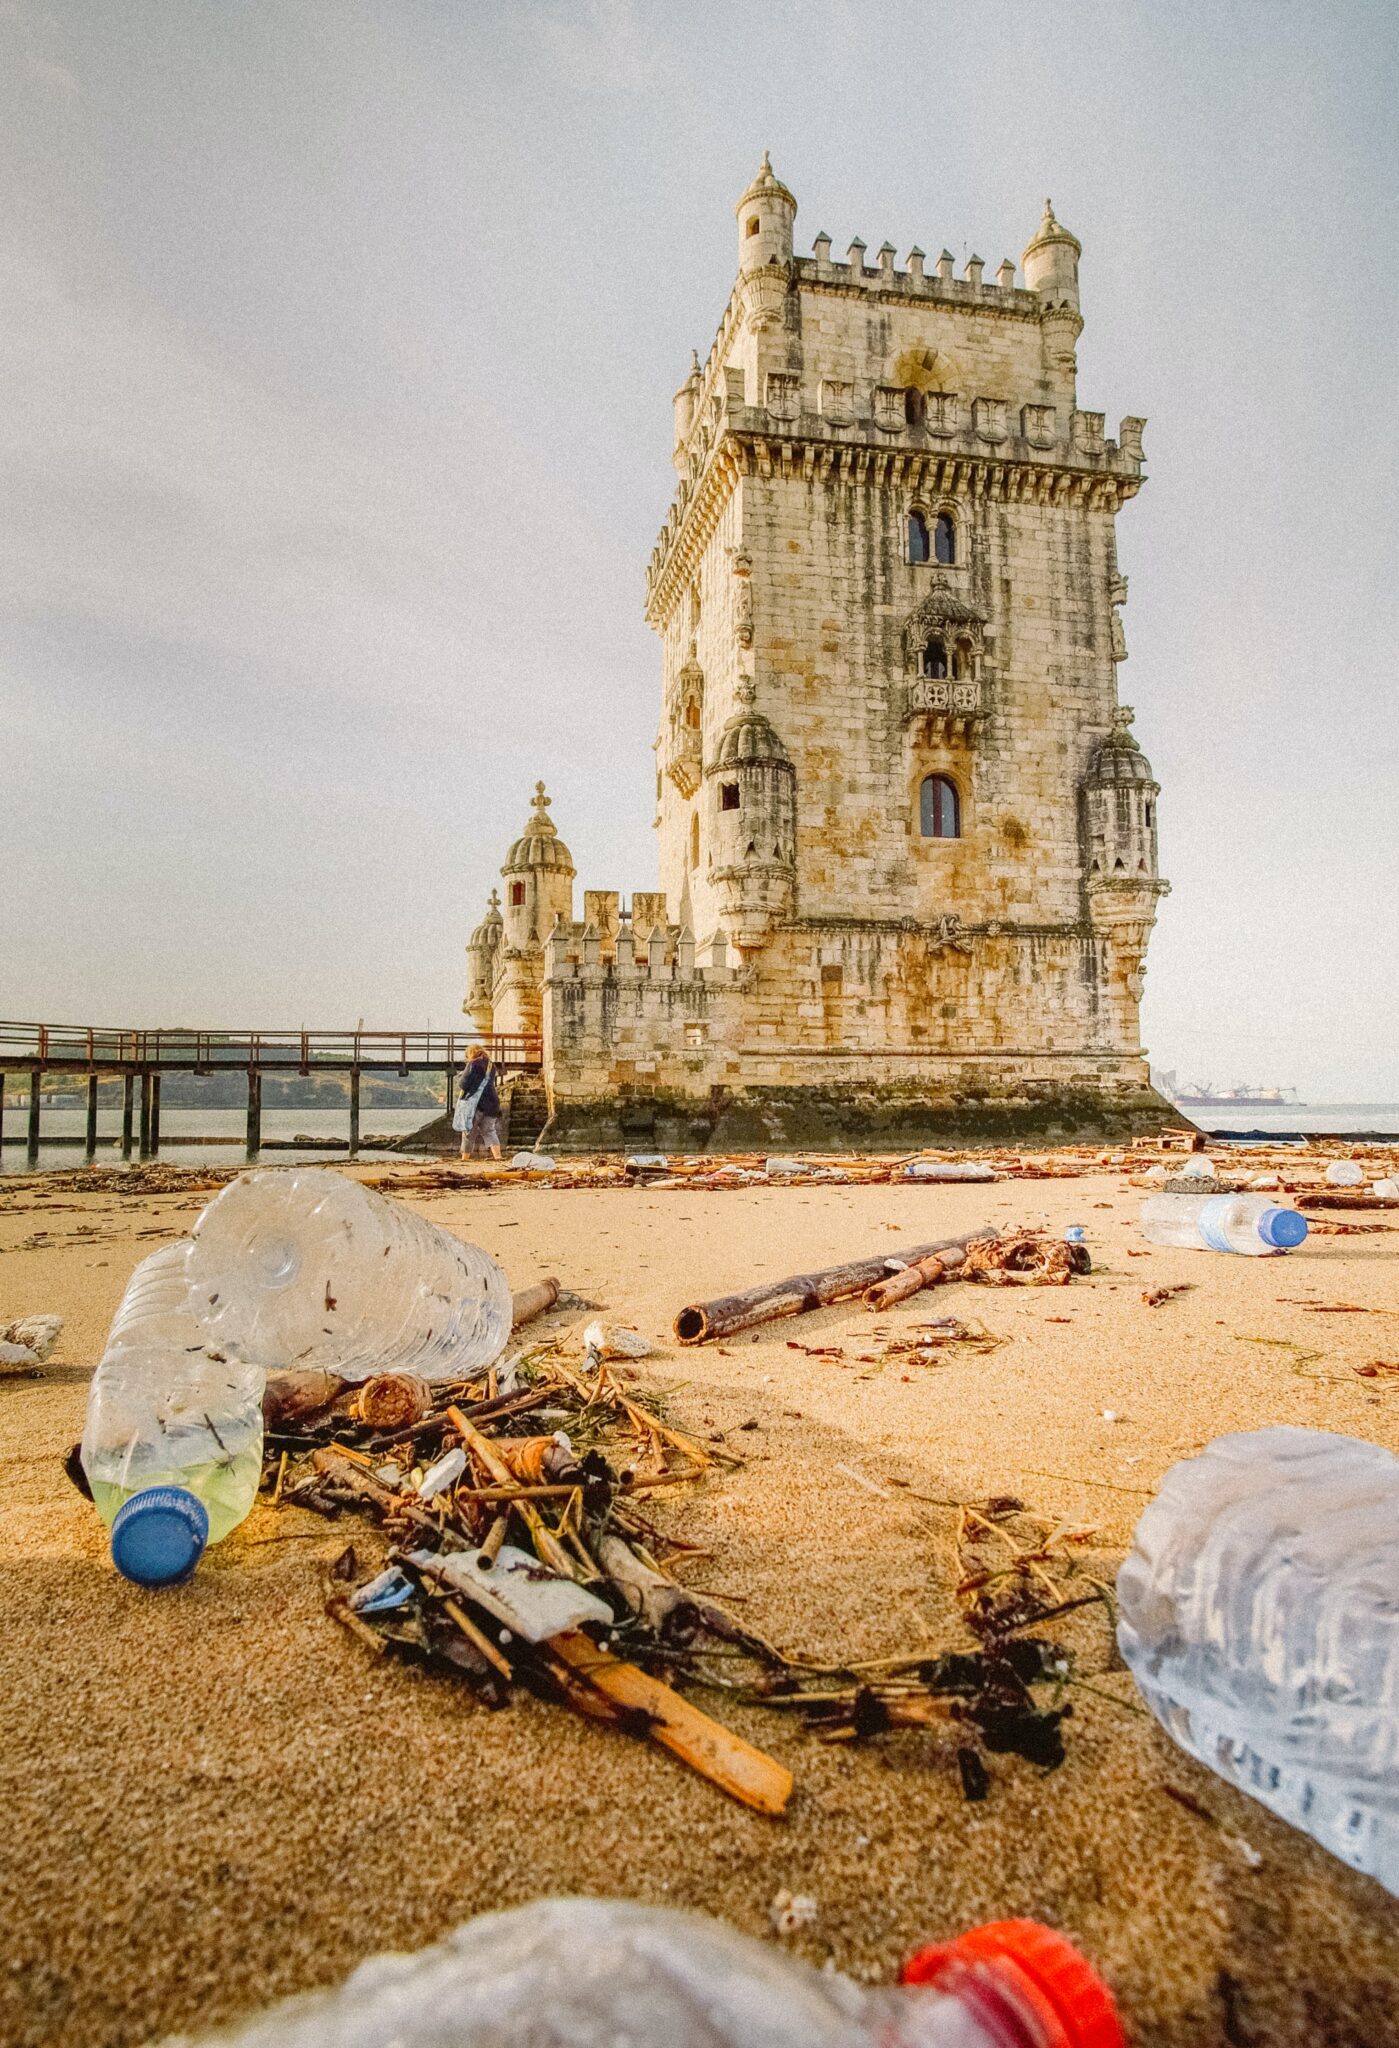 “Zero Waste” in Portugal: knowledge and practices